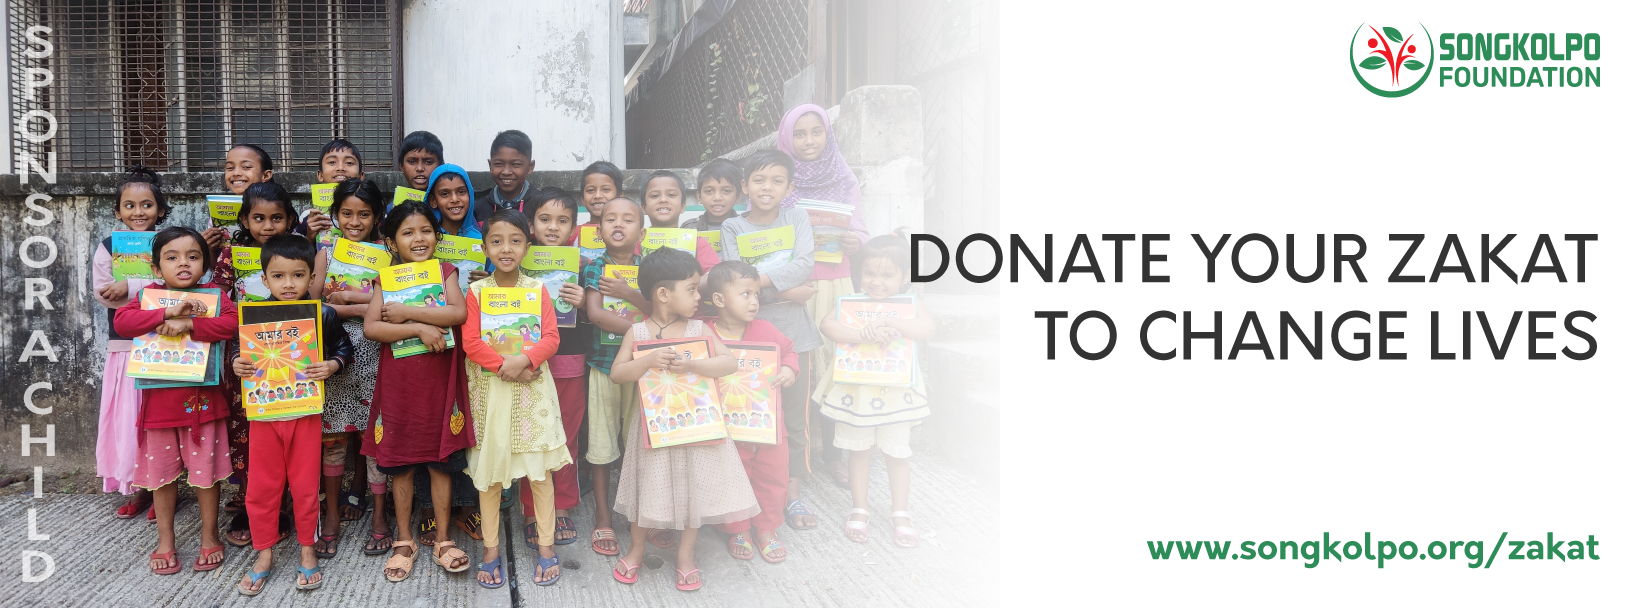 Donate-Your-Zakat-Cover-2